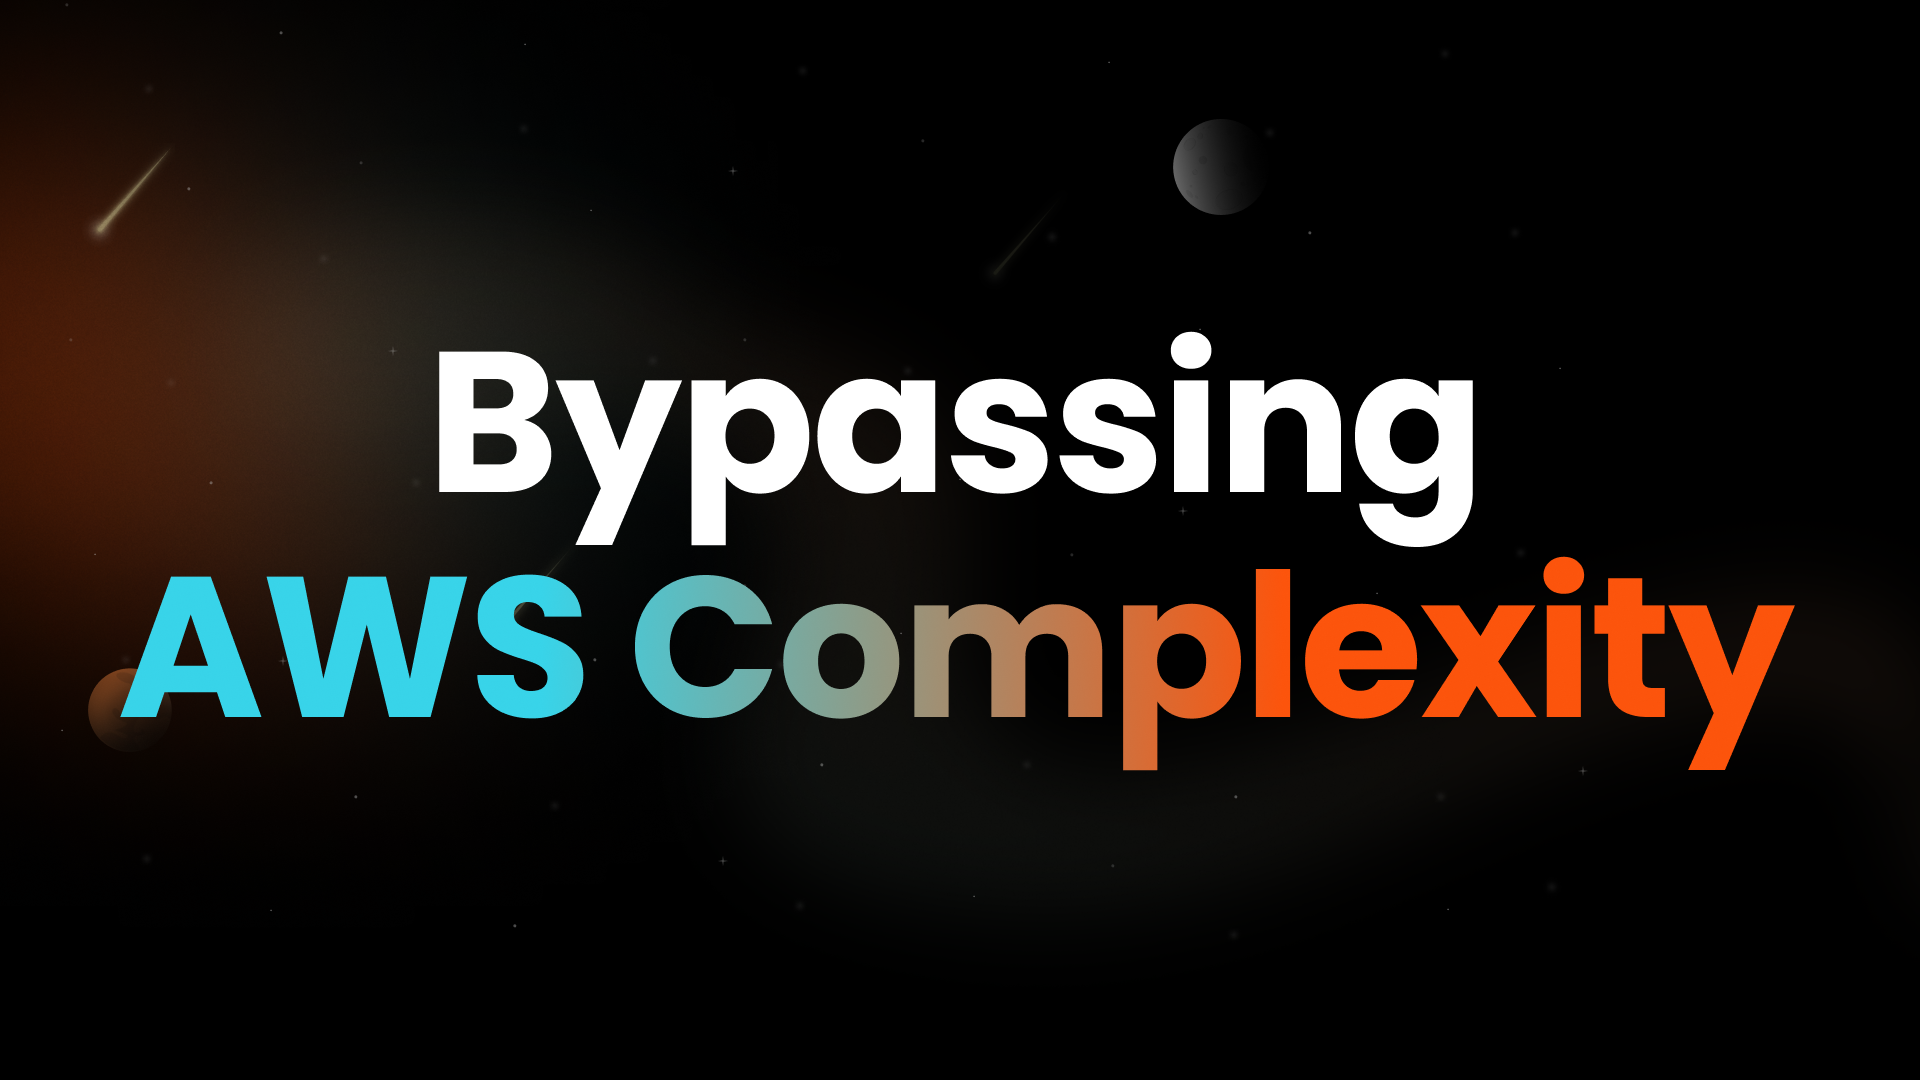 How We're Bypassing AWS Complexity